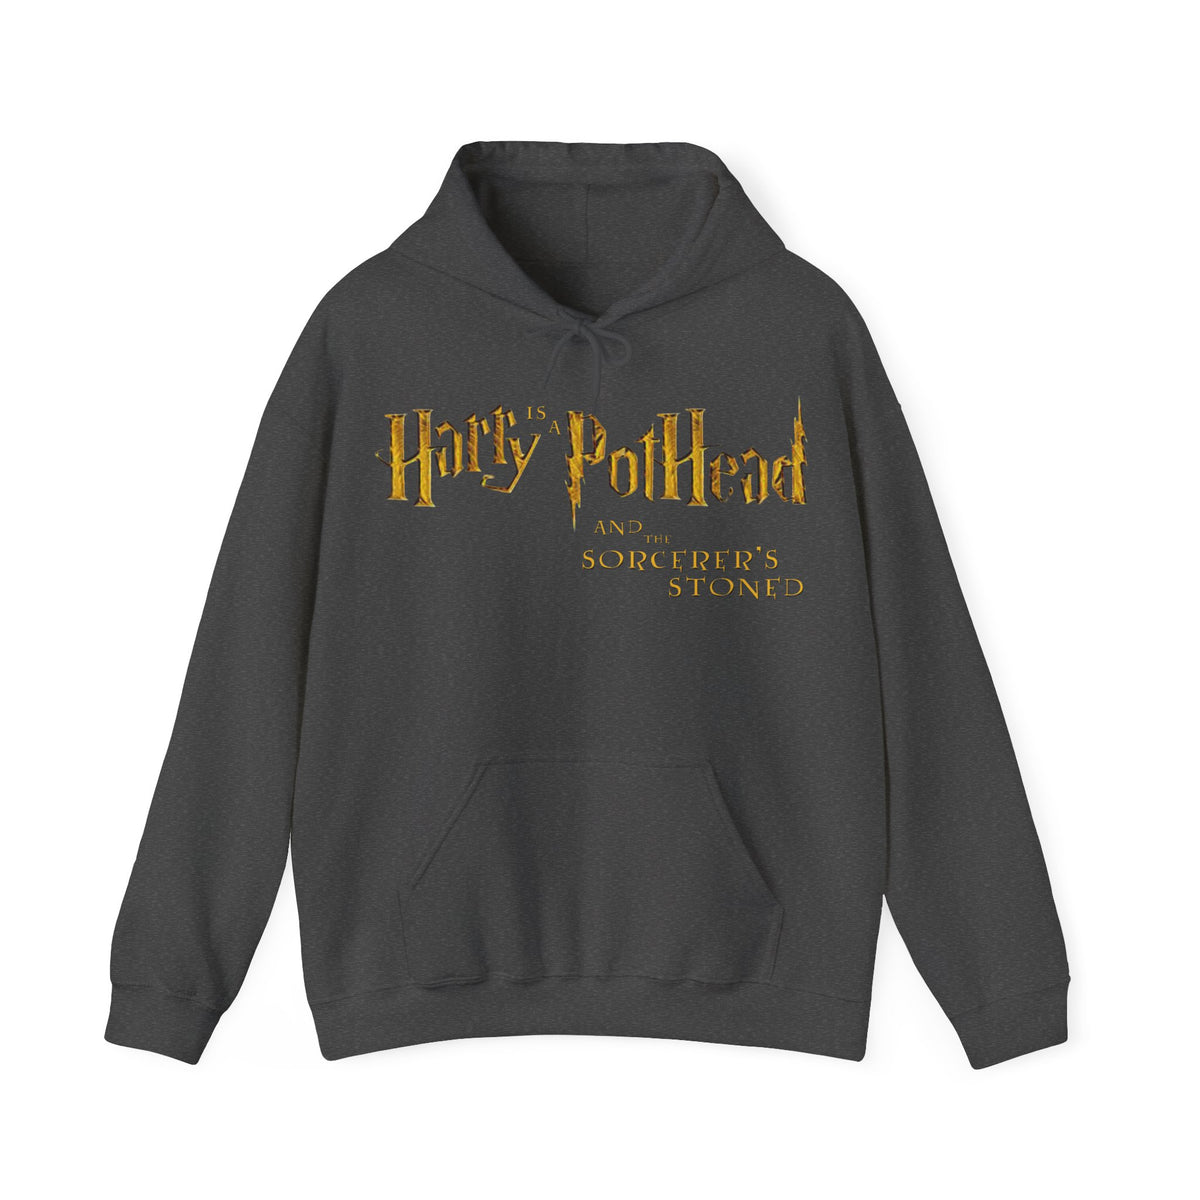 Harry Is A Pothead And The Sorcerer's Stoned - Hoodie